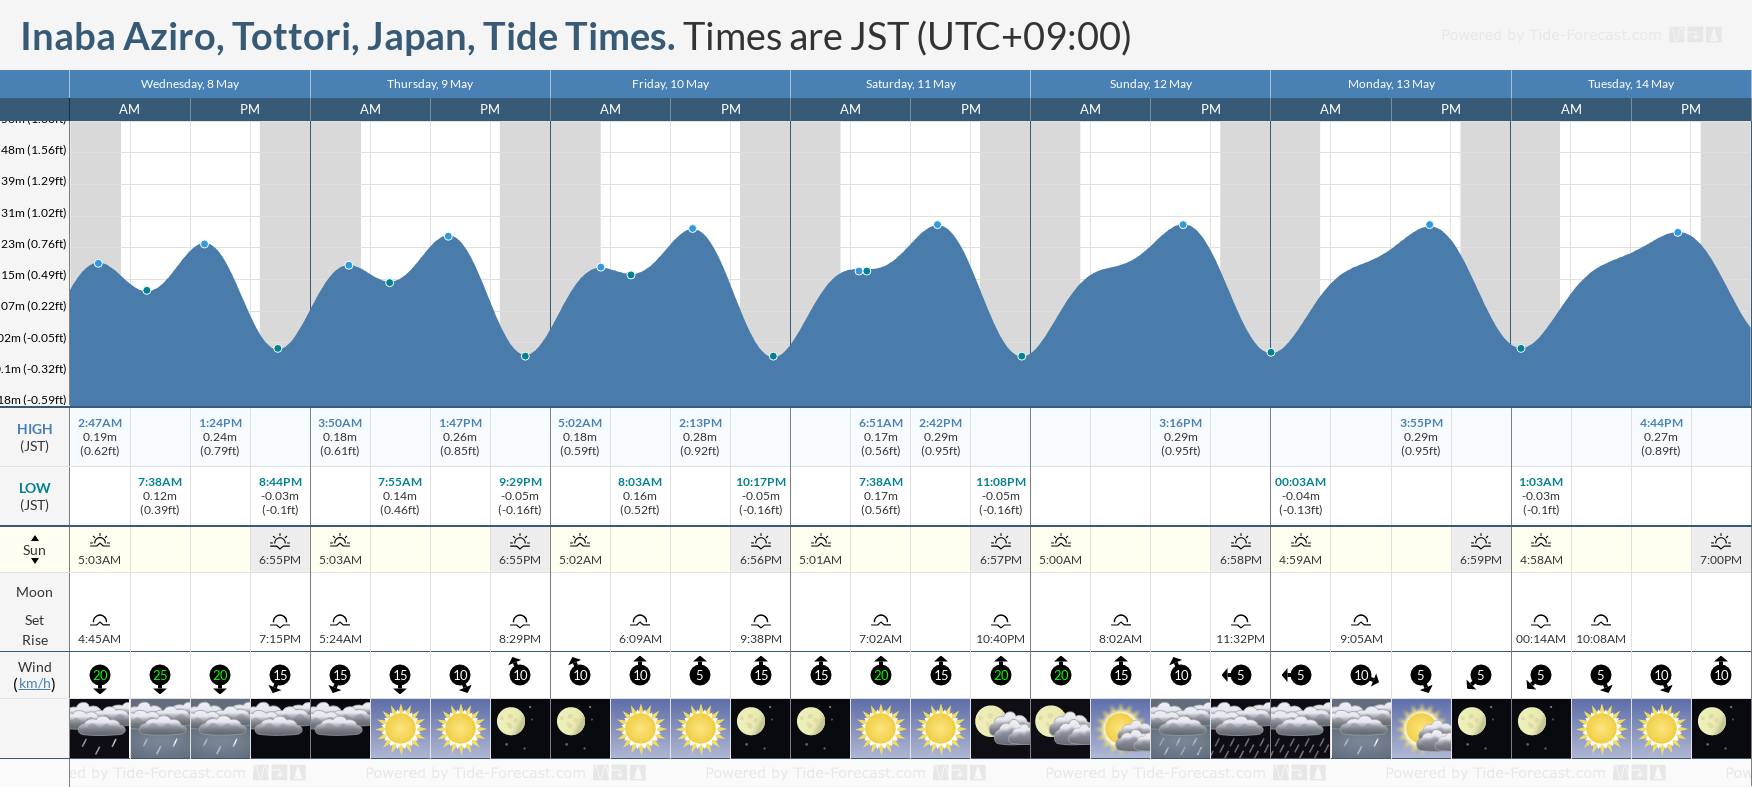 Inaba Aziro, Tottori, Japan Tide Chart including high and low tide tide times for the next 7 days